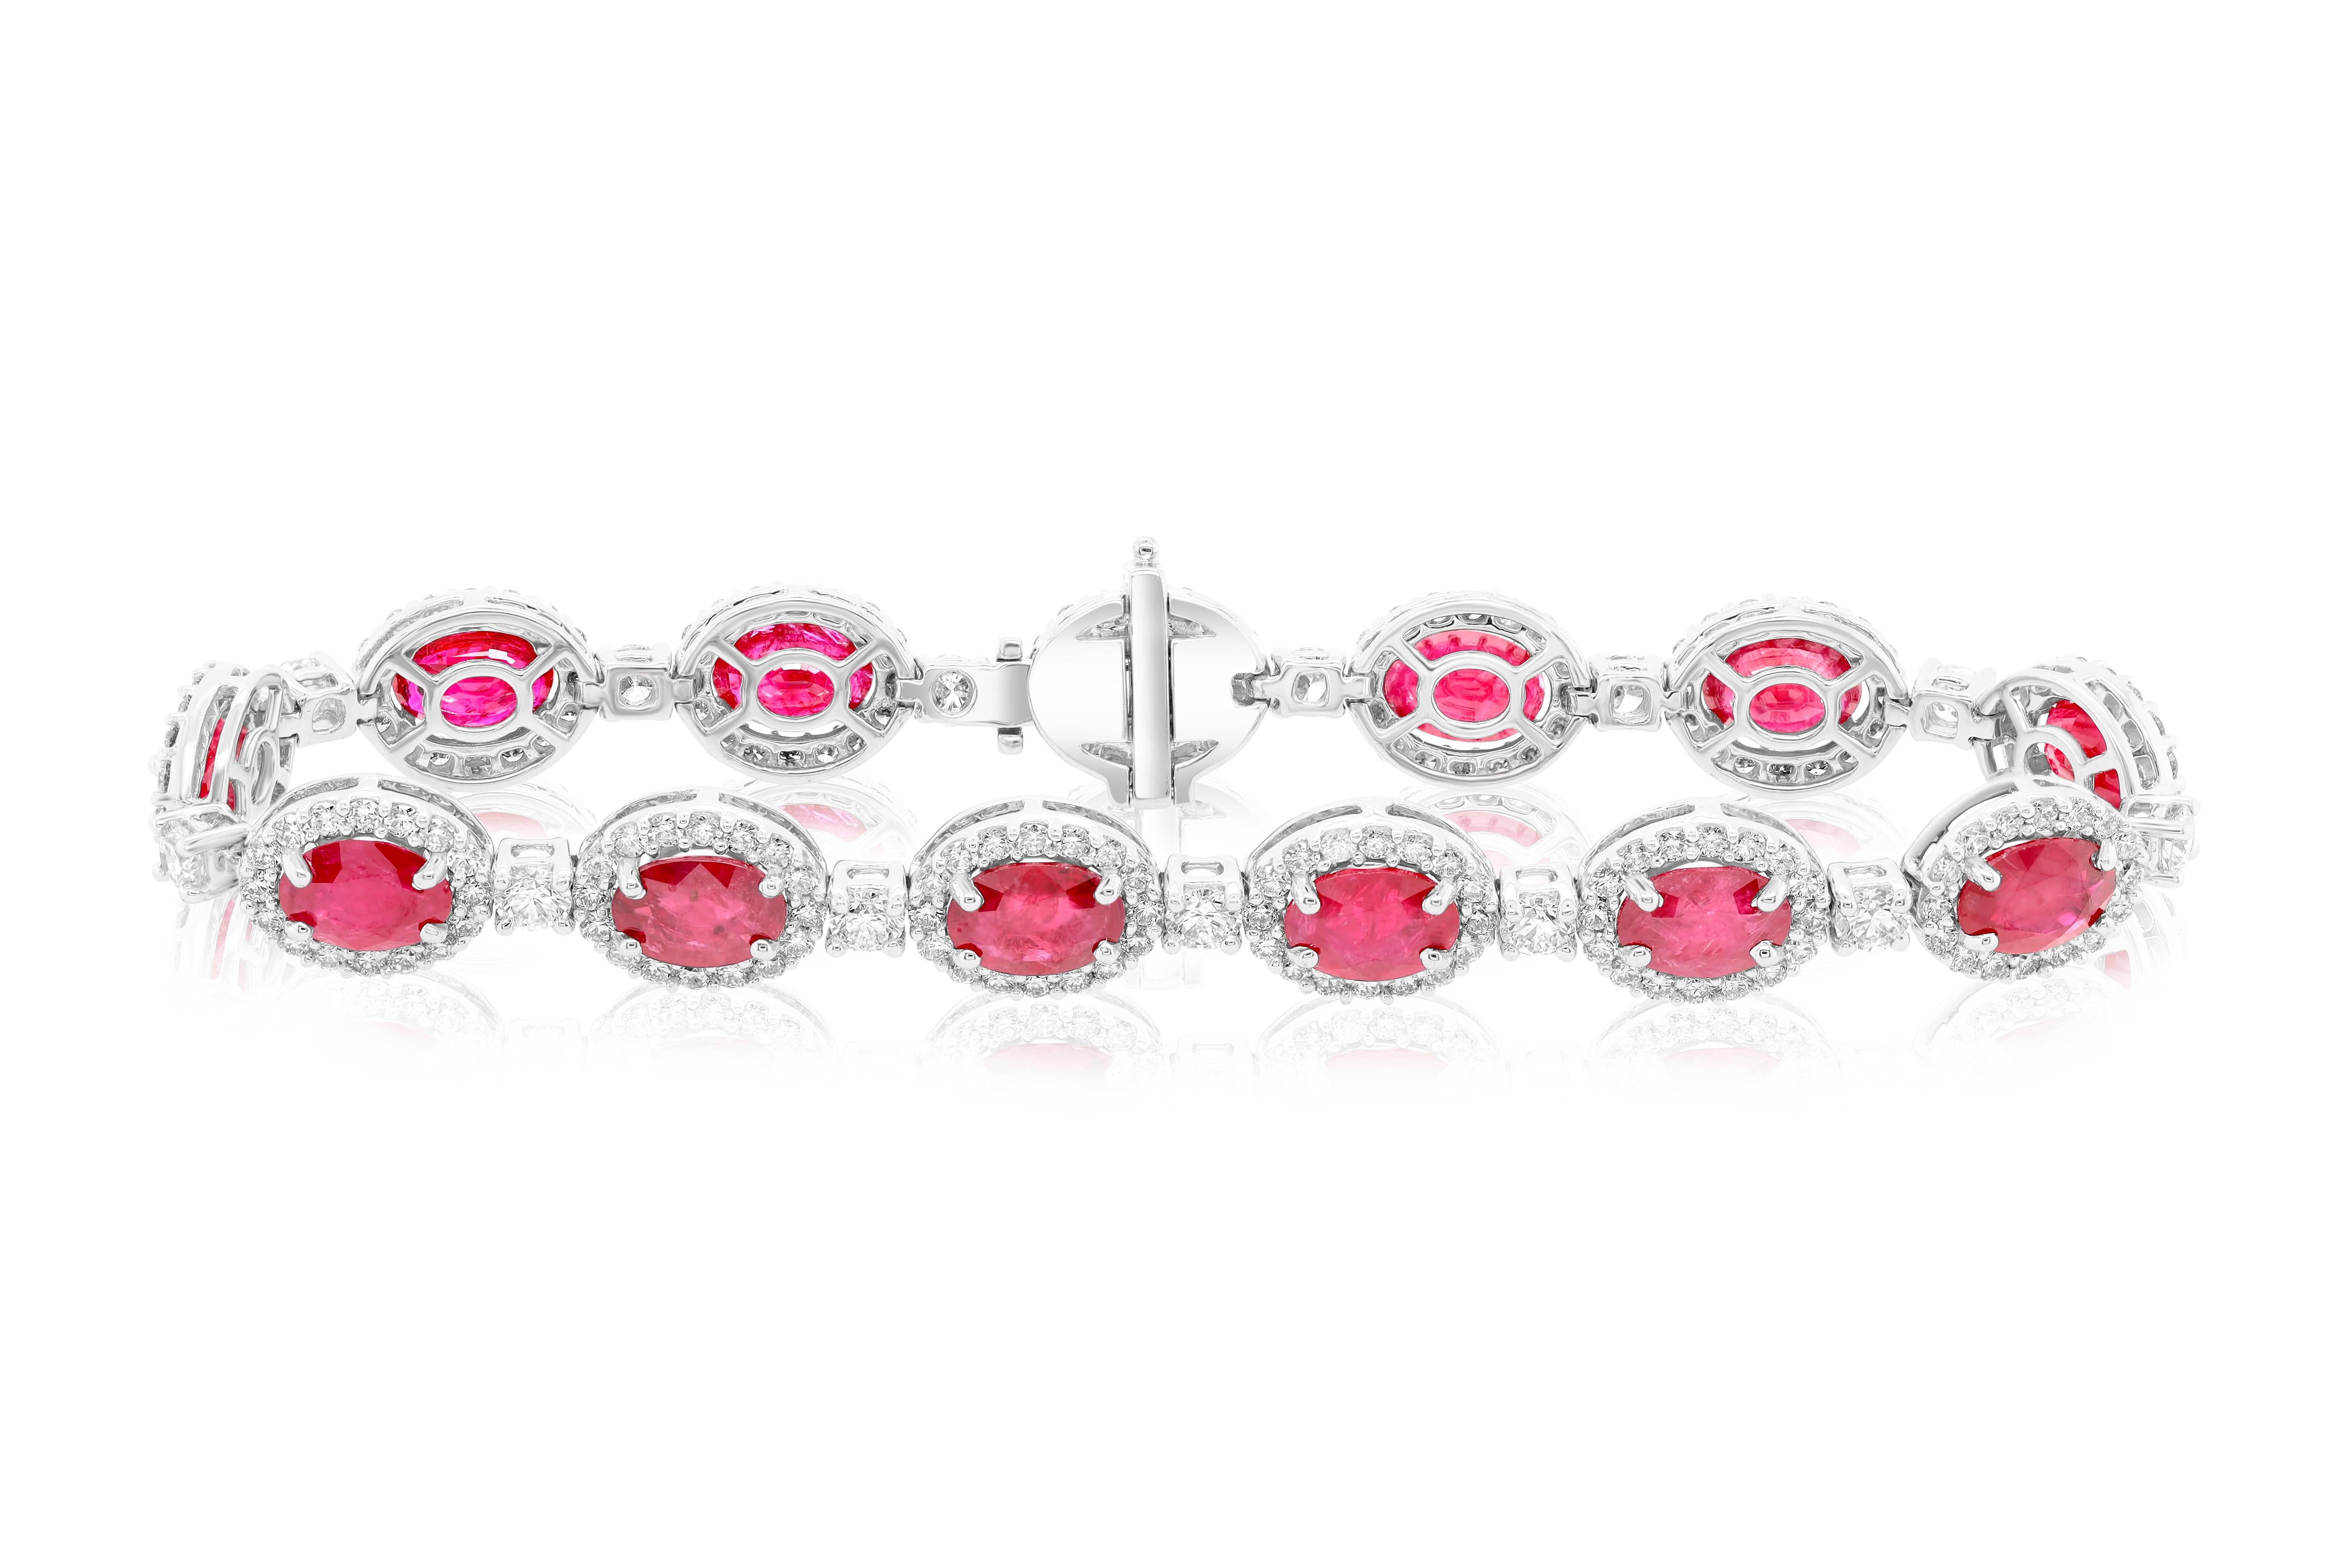 18k white gold ruby and diamonds five row bracelet. 
Gem information:
11.91 Carats of 13 Oval Shaped Natural Certified Rubies

Diamond information:
4.12 carats of round brilliant cut diamonds. 

G H in color SI in clarity 
